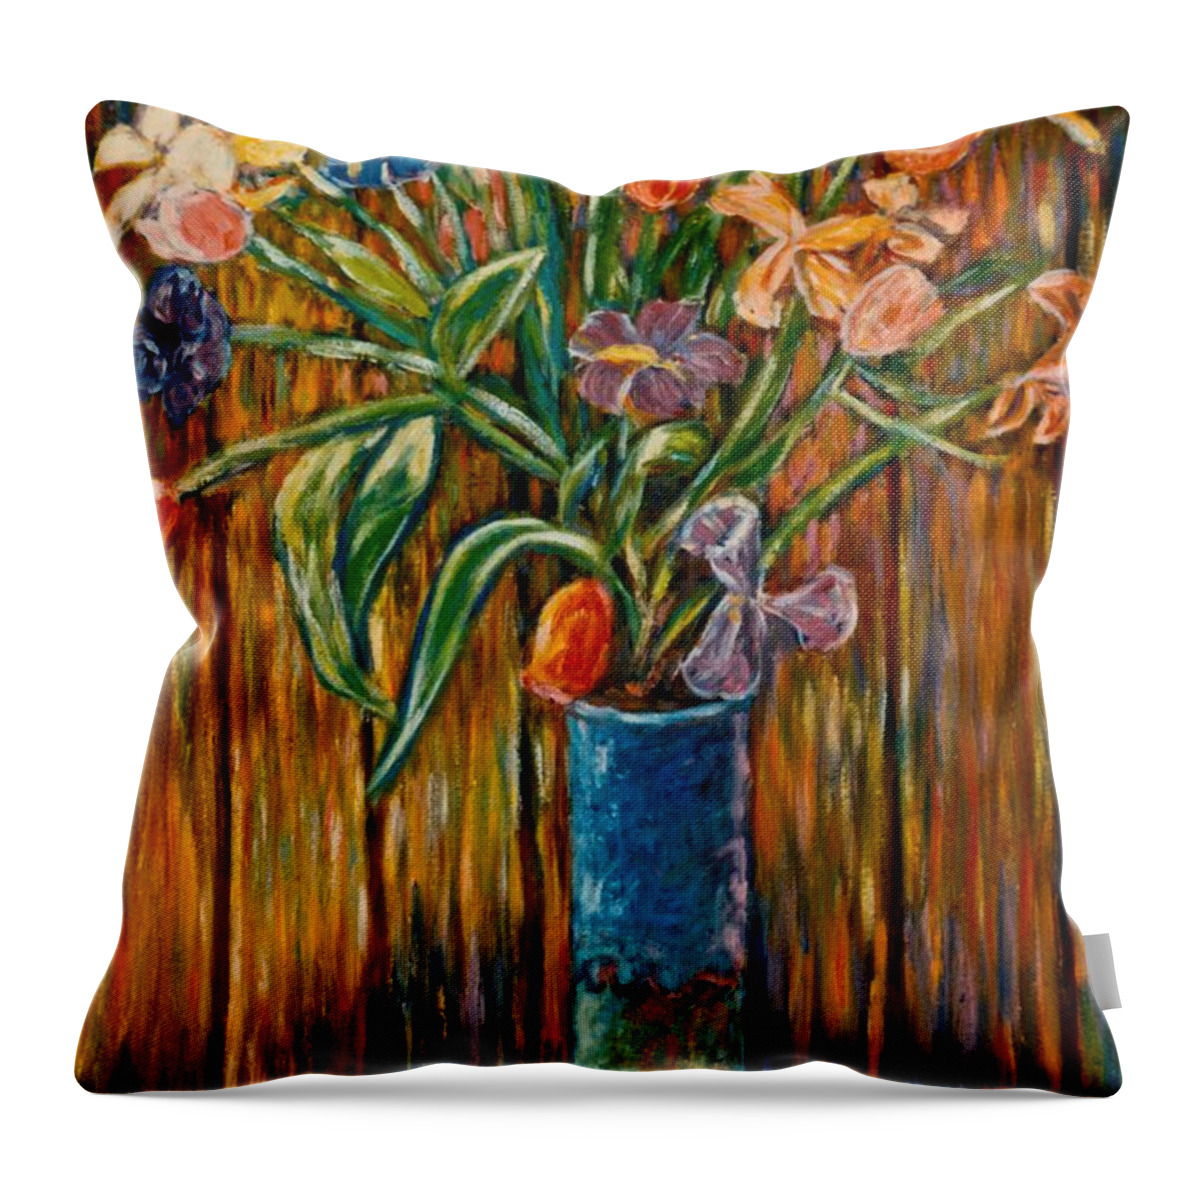 Vase Of Flowers Throw Pillow featuring the painting Tall Blue Vase by Kendall Kessler